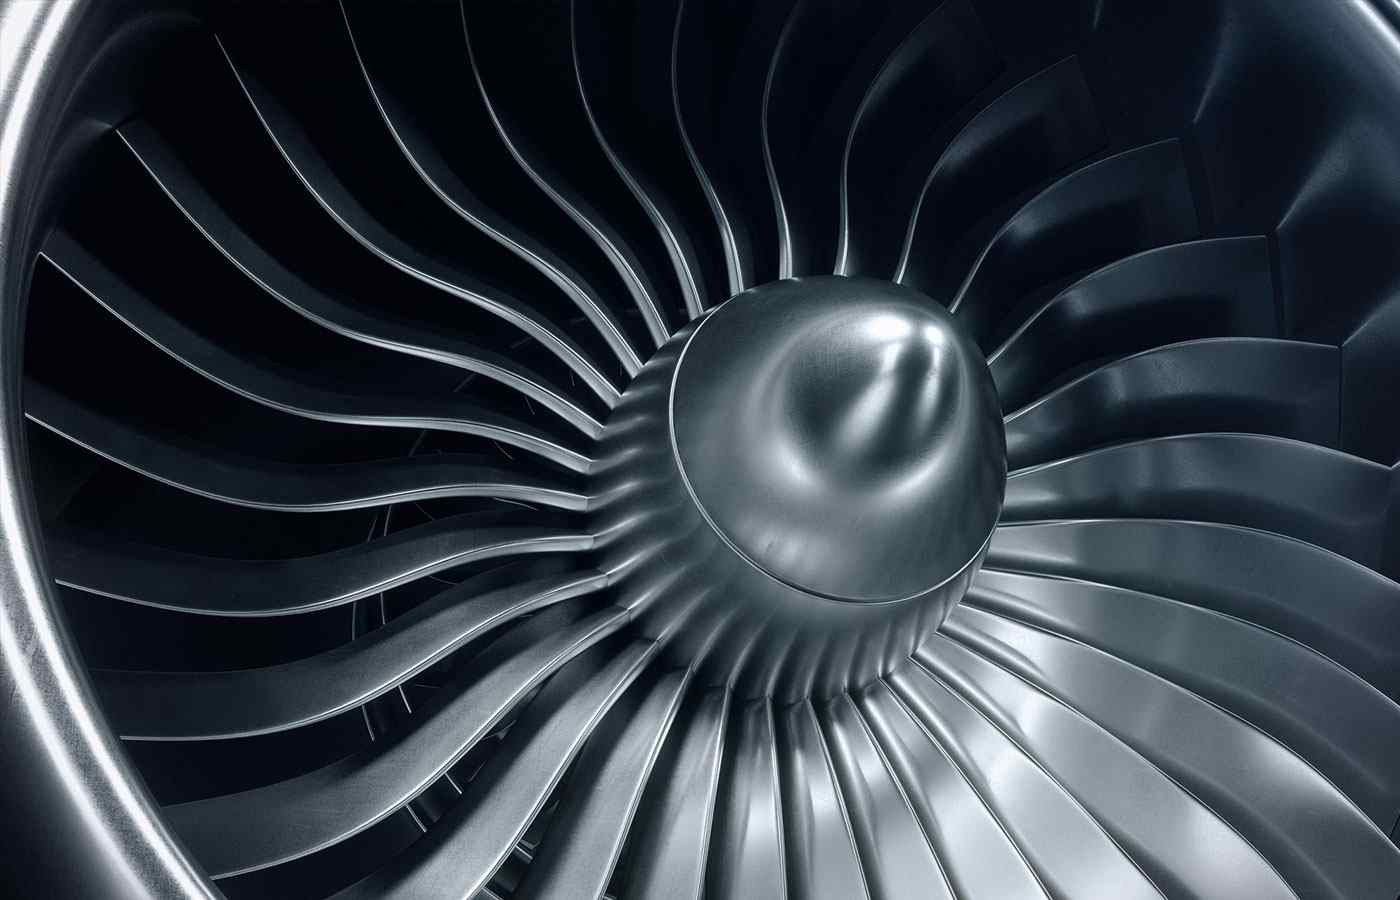 What’s Next For The Rolls Royce Share Price?